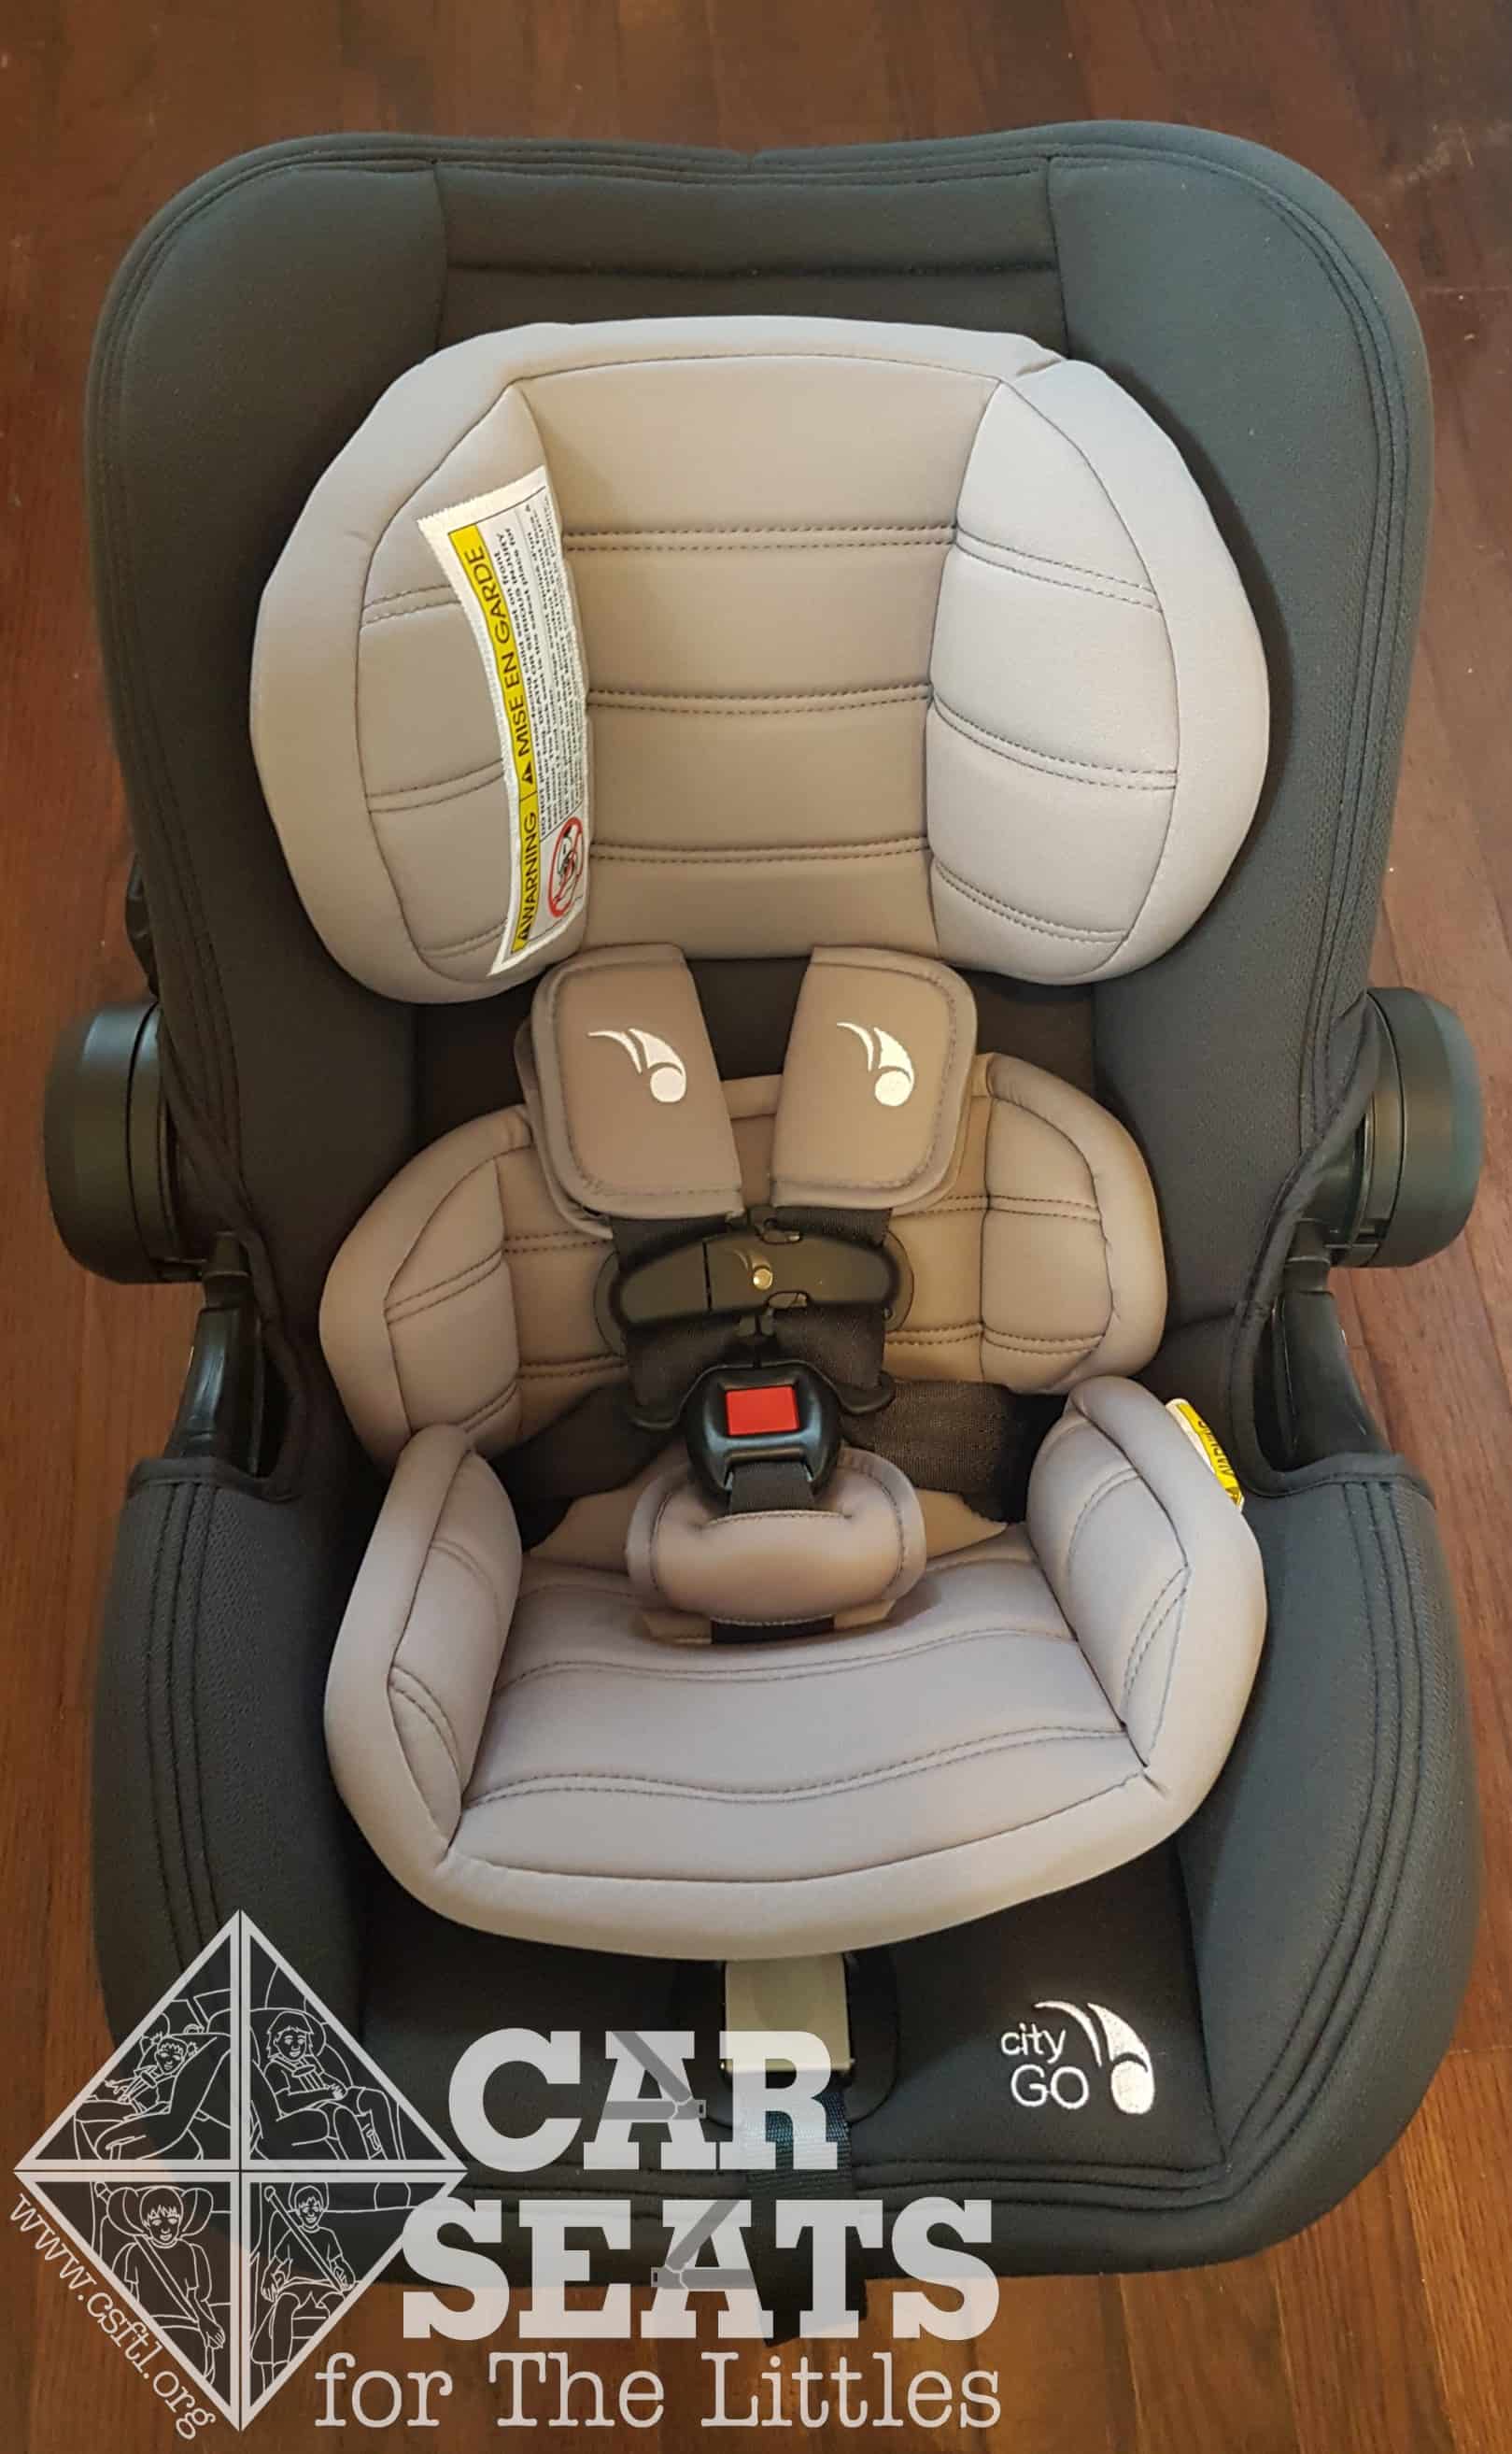 tale Bungalow En trofast Baby Jogger City GO Canada Review - Car Seats For The Littles